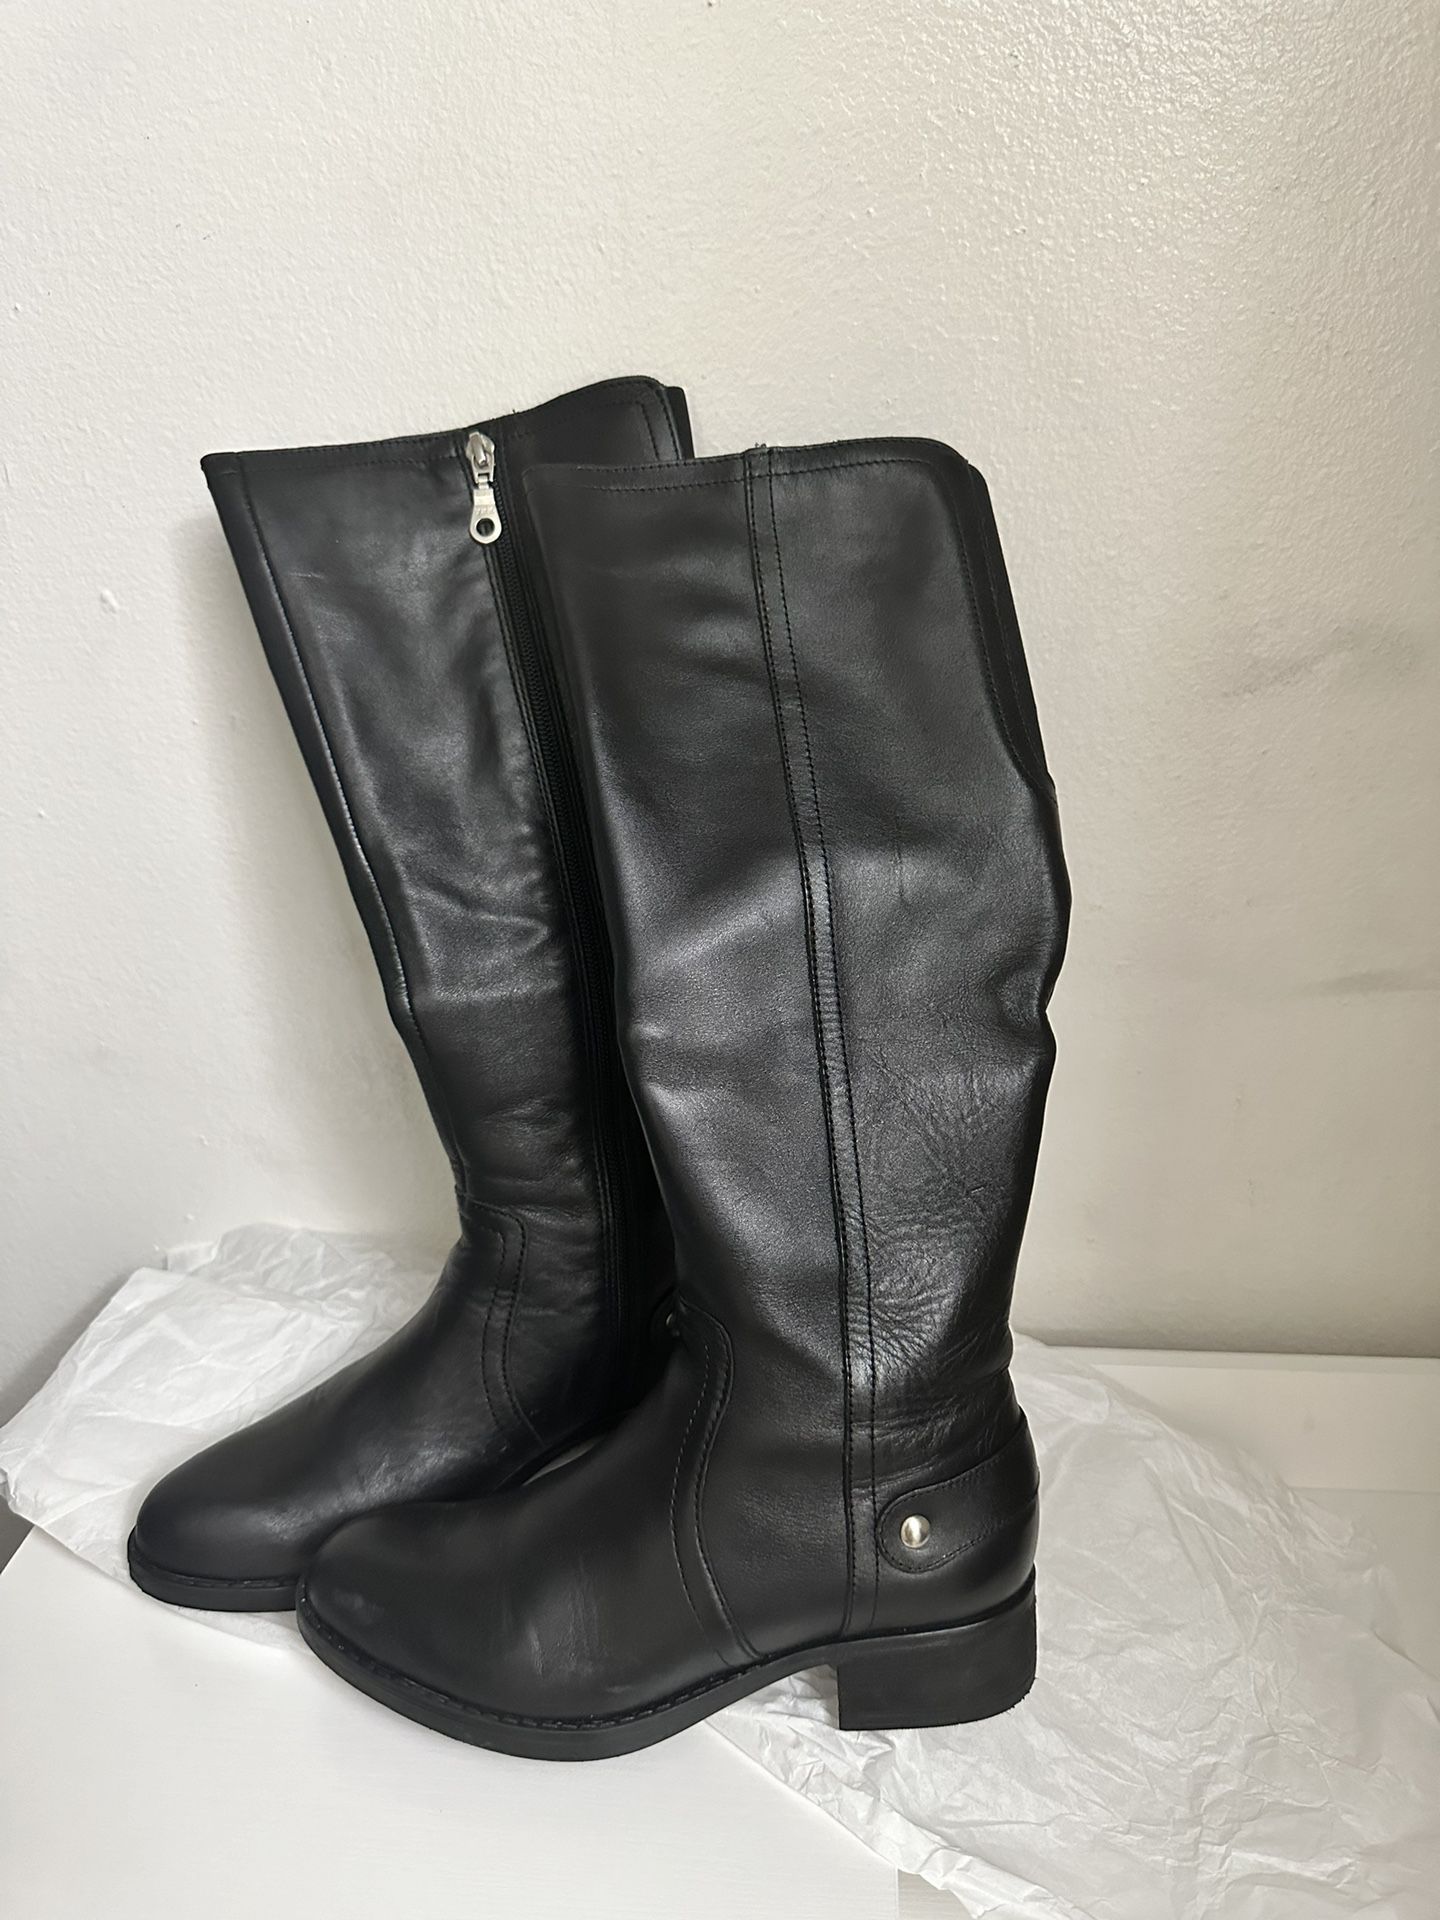 Boots Women’s Size 5.5